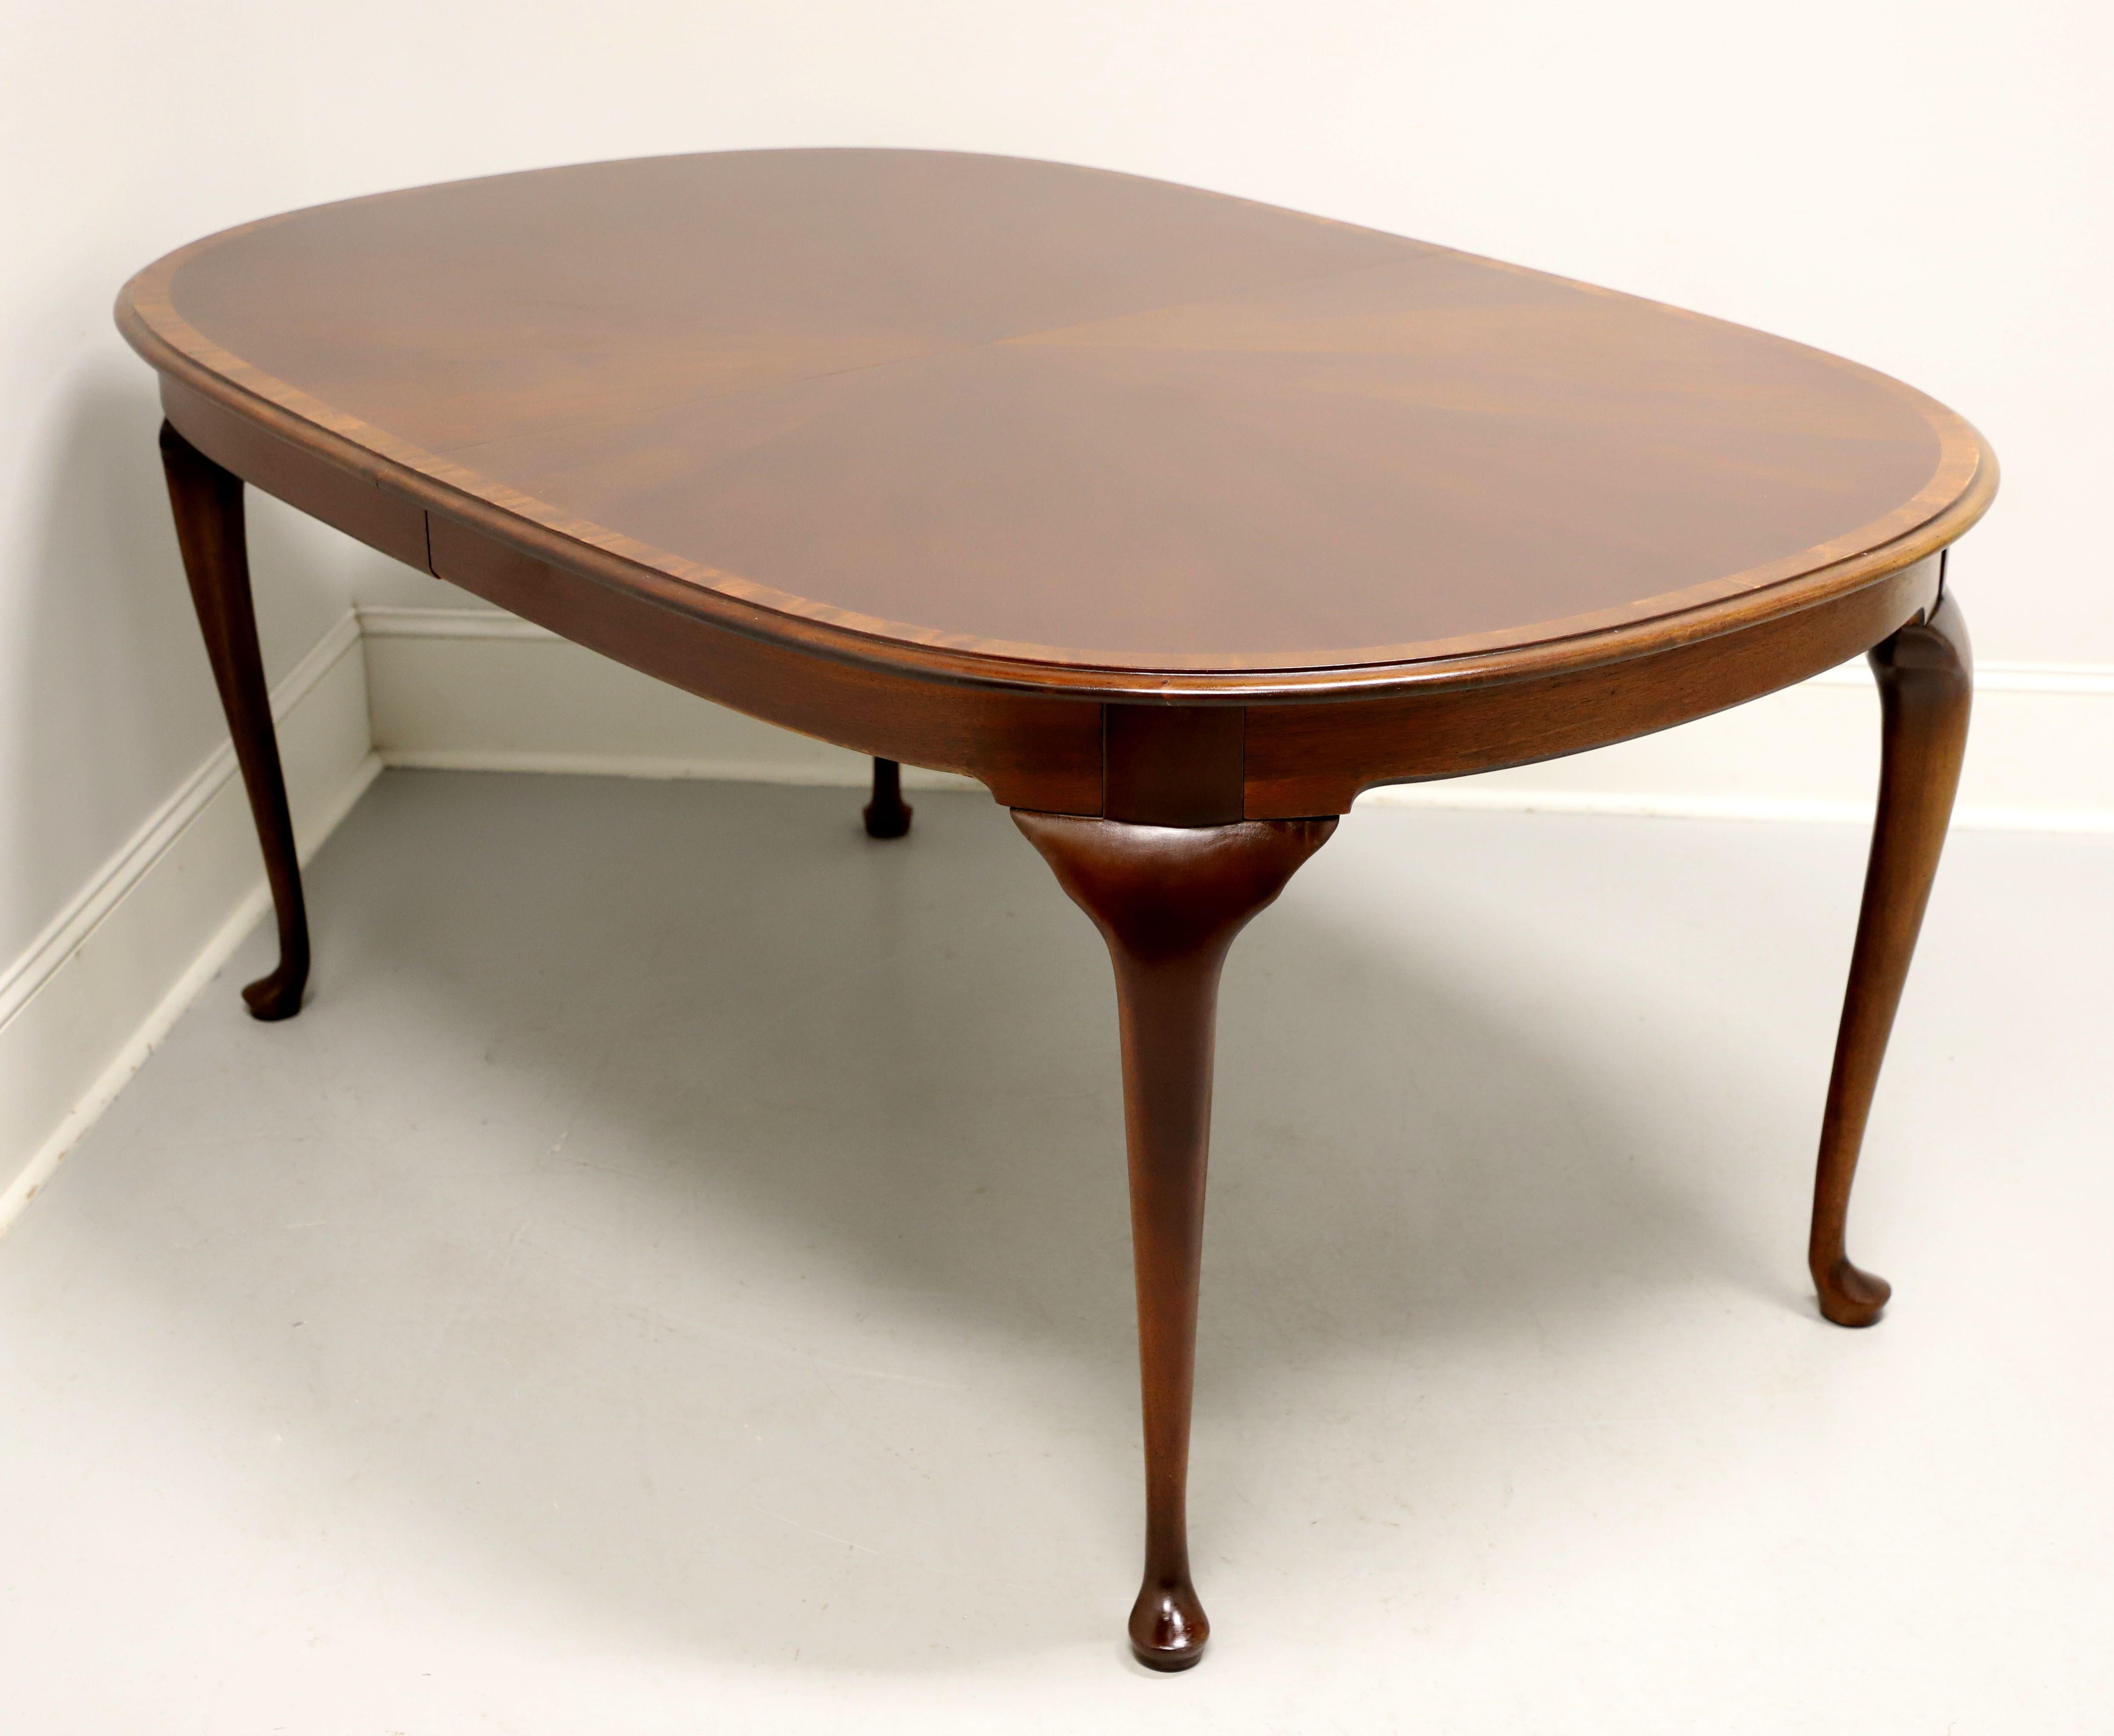 A Queen Anne style oval dining table by high-quality furniture maker Hickory Chair. Mahogany with a banded bevel edge to the top, solid apron, carved knees, cabriole legs and pad feet. Includes two 20 inch extension leaves for placement on metal